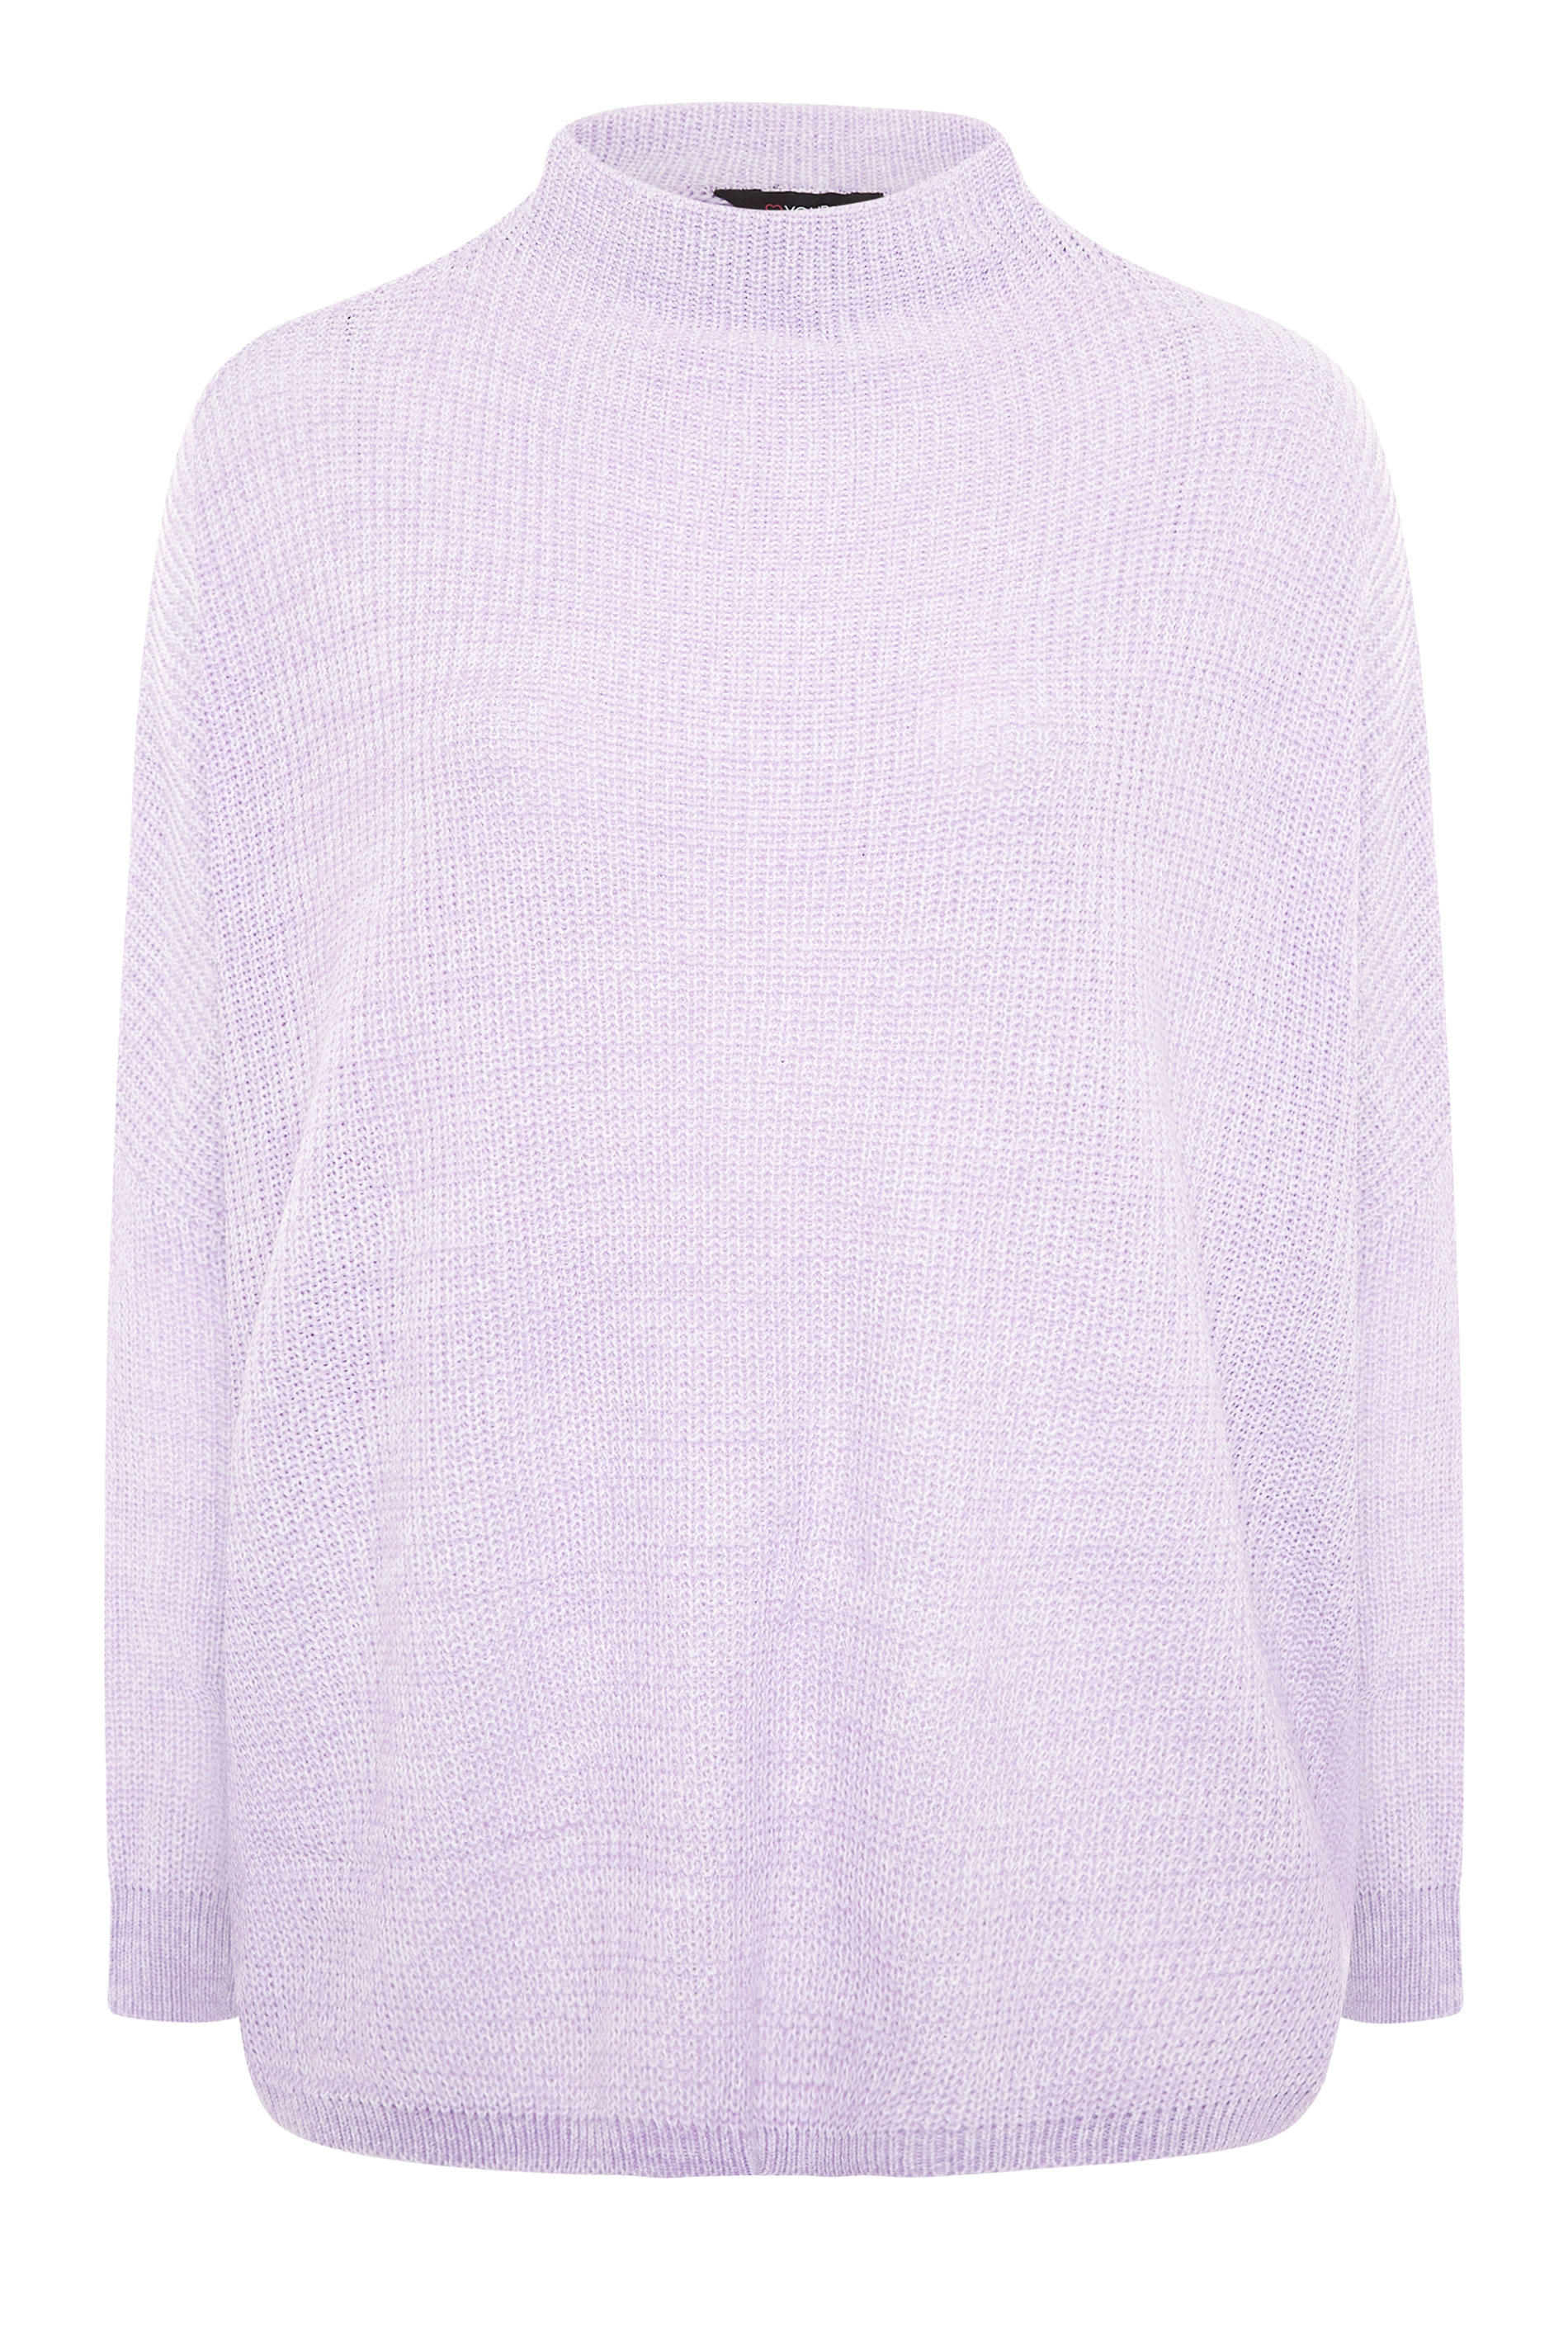 Plus Size Lilac Oversized Knitted Jumper | Yours Clothing